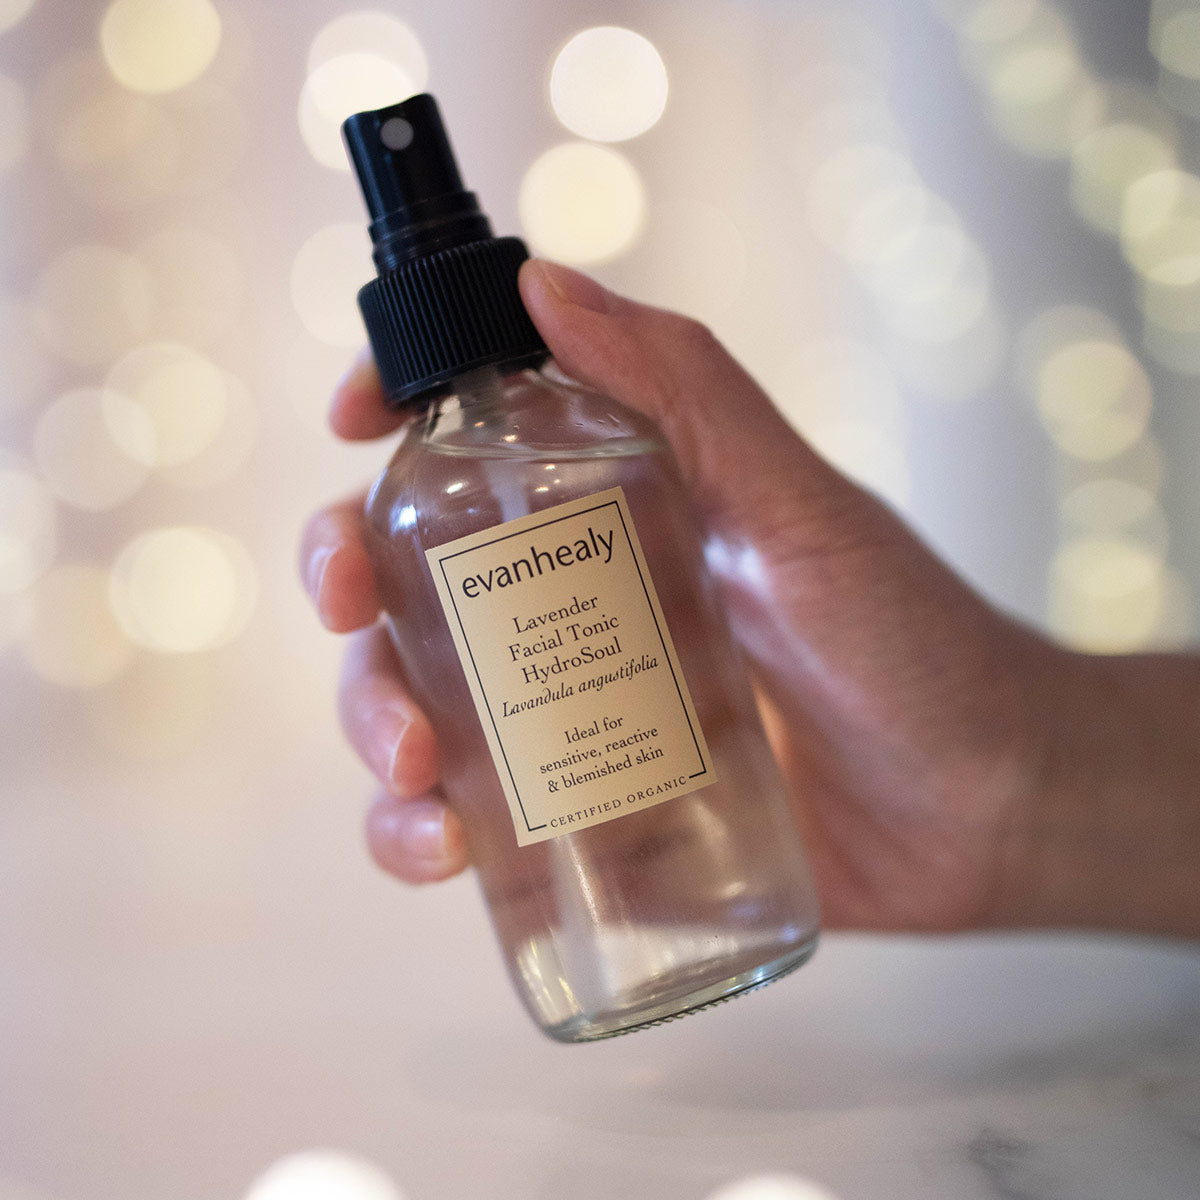 copper distilled lavender hydrosol facial toner in hand with twinkling lights